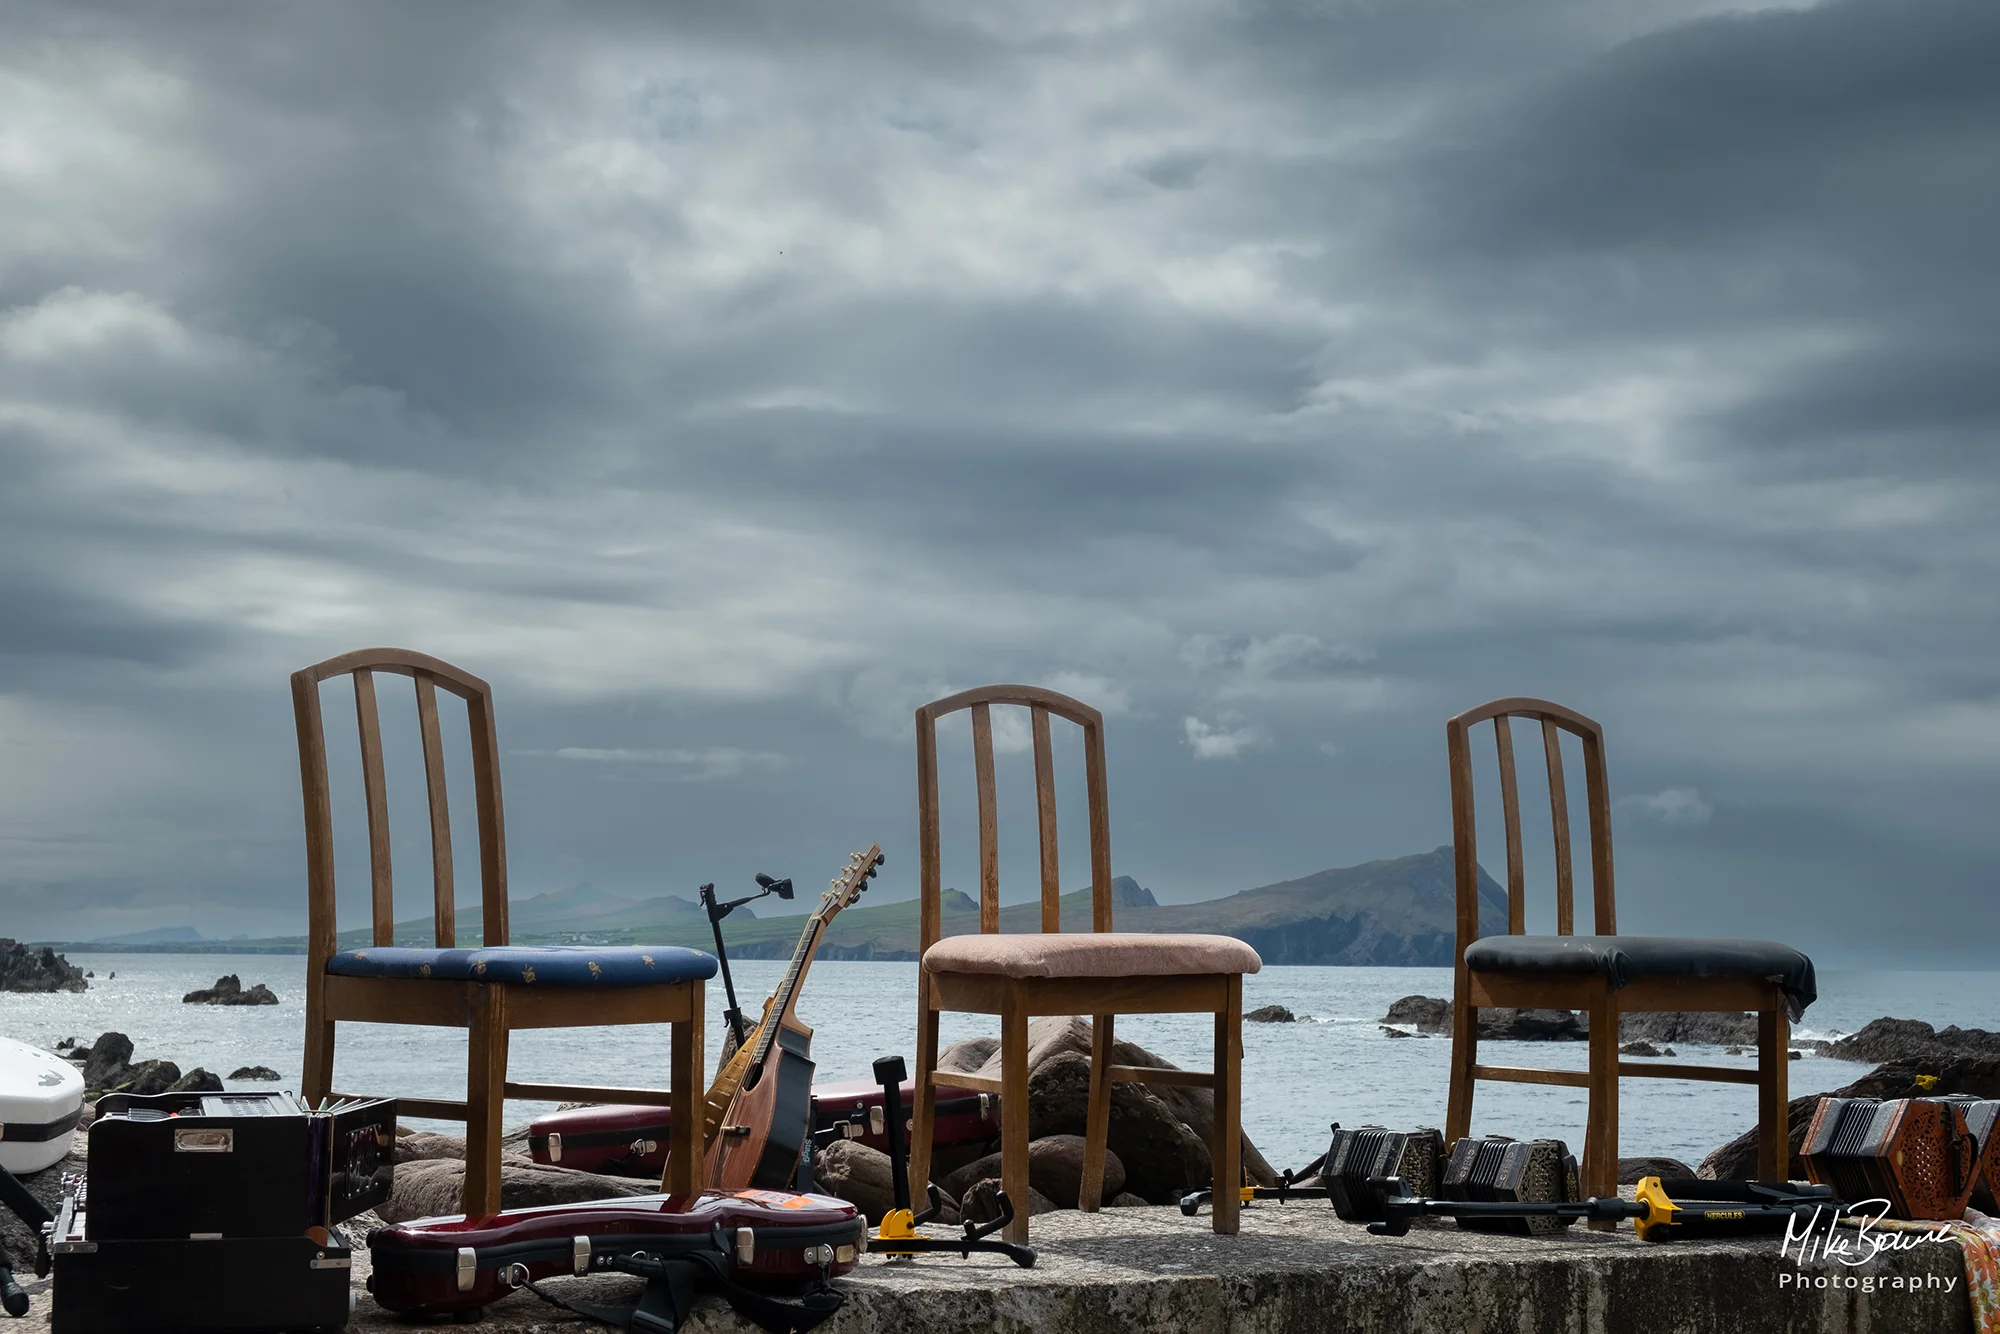 Three empty chairs and musical instruments on harbour wall with mountains beyond